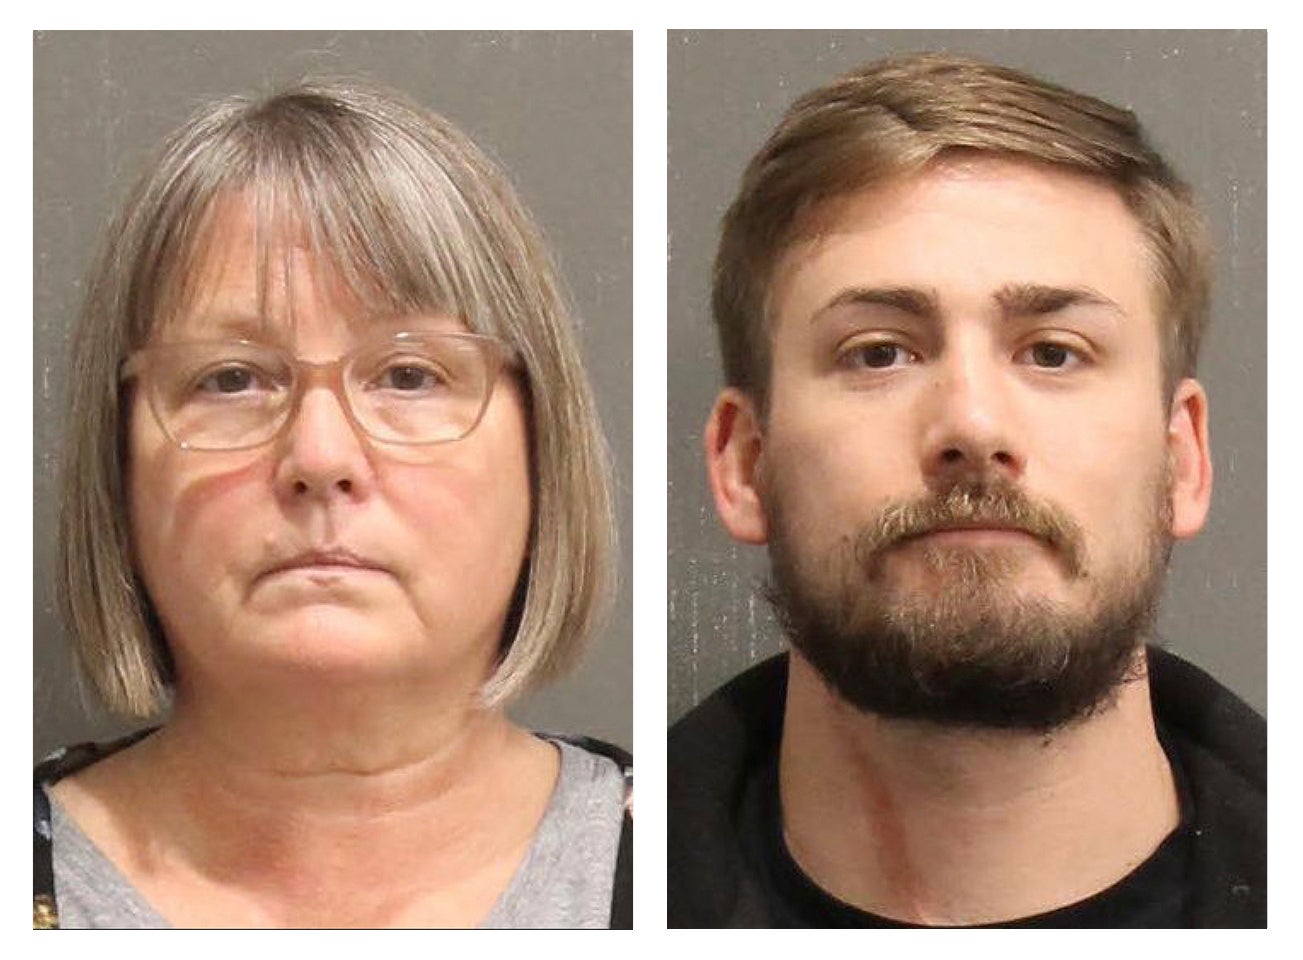 Home confinement for man, mother charged in Capitol riot Georgia Tennessee Nashville Senate The Independent